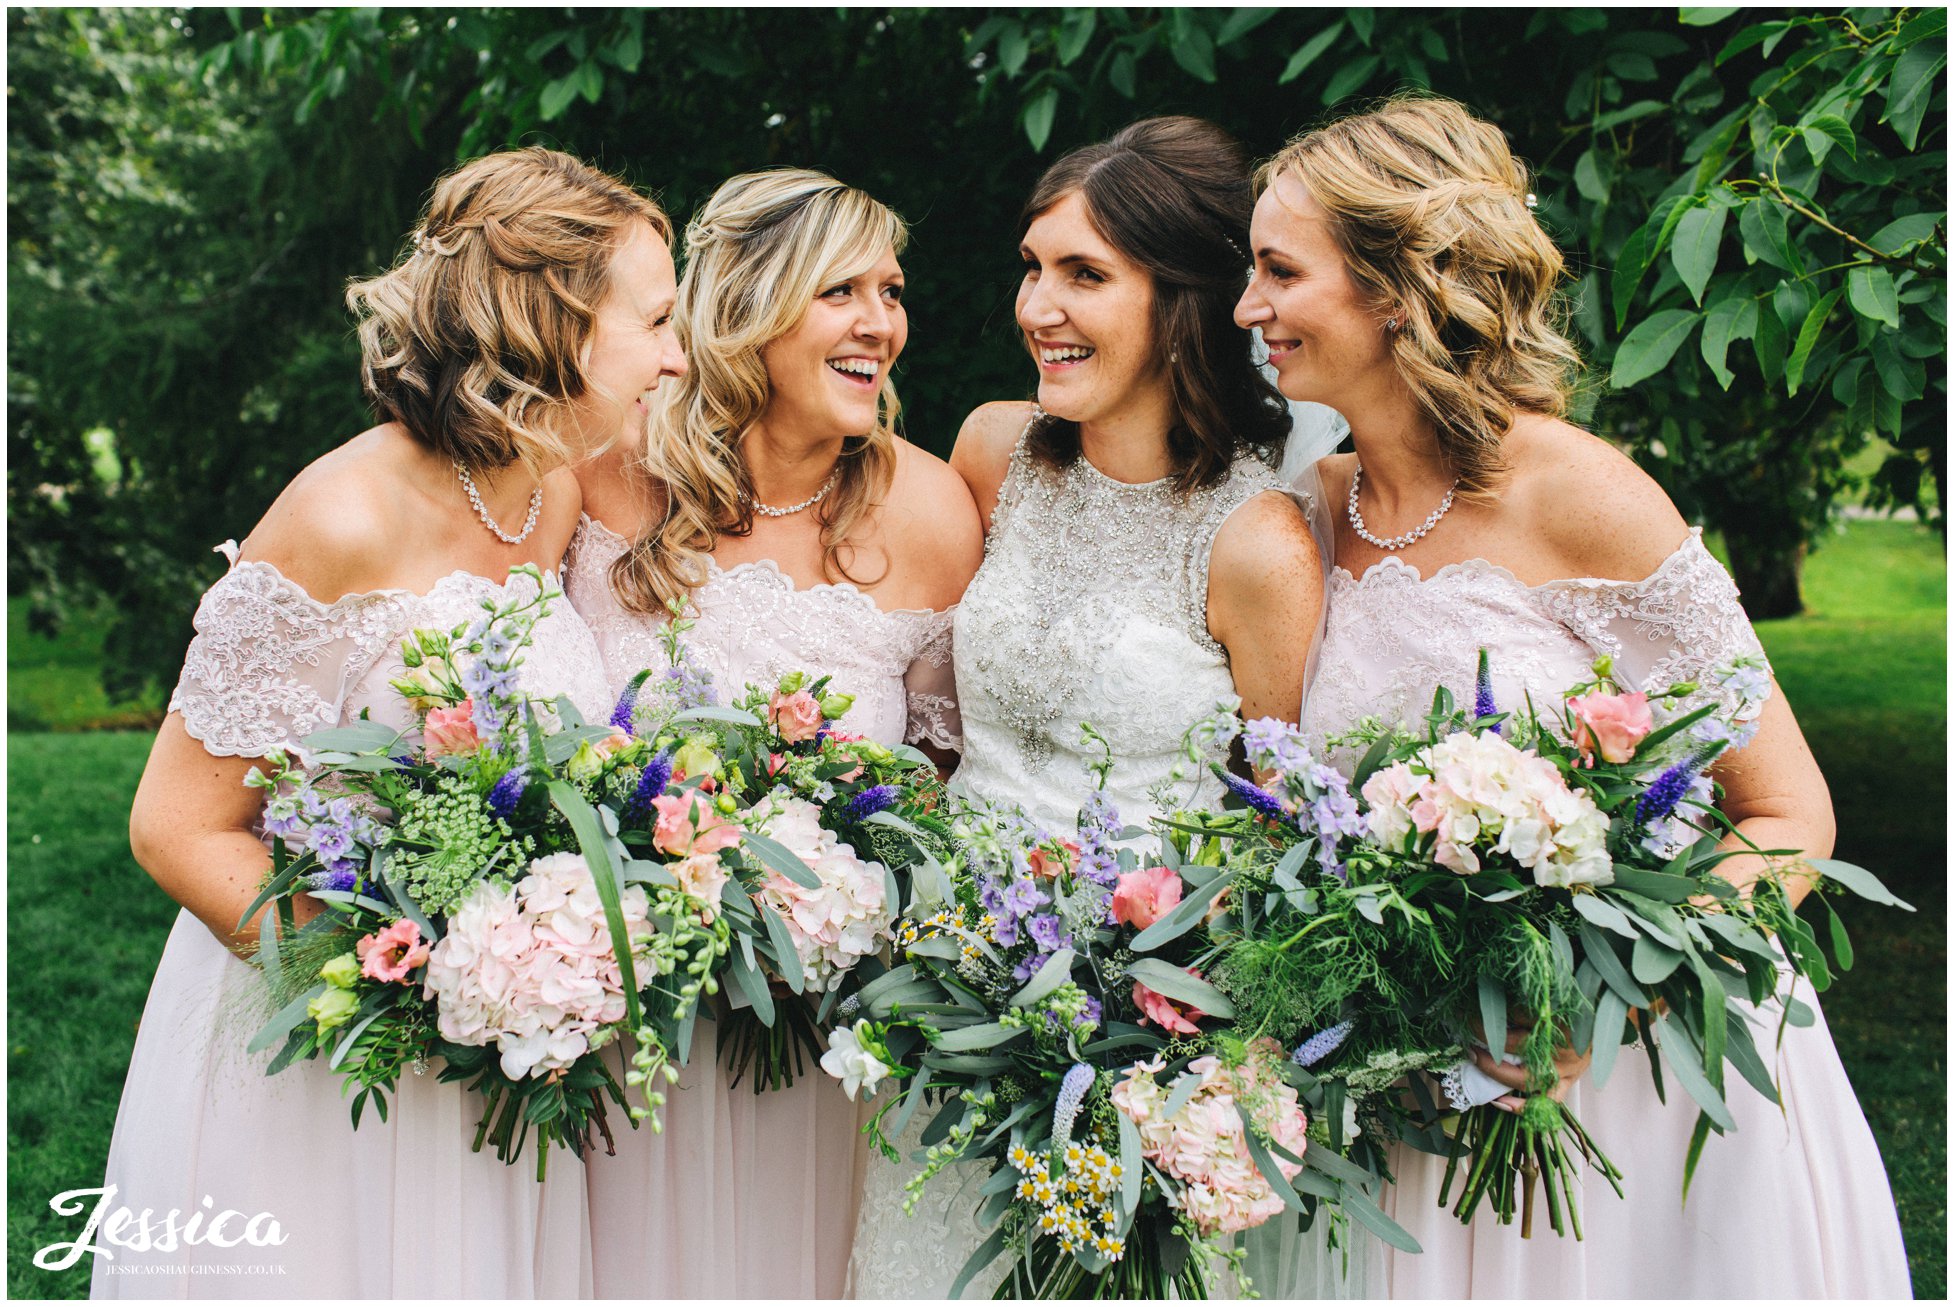 bride and bridesmaids laugh together for their group photograph